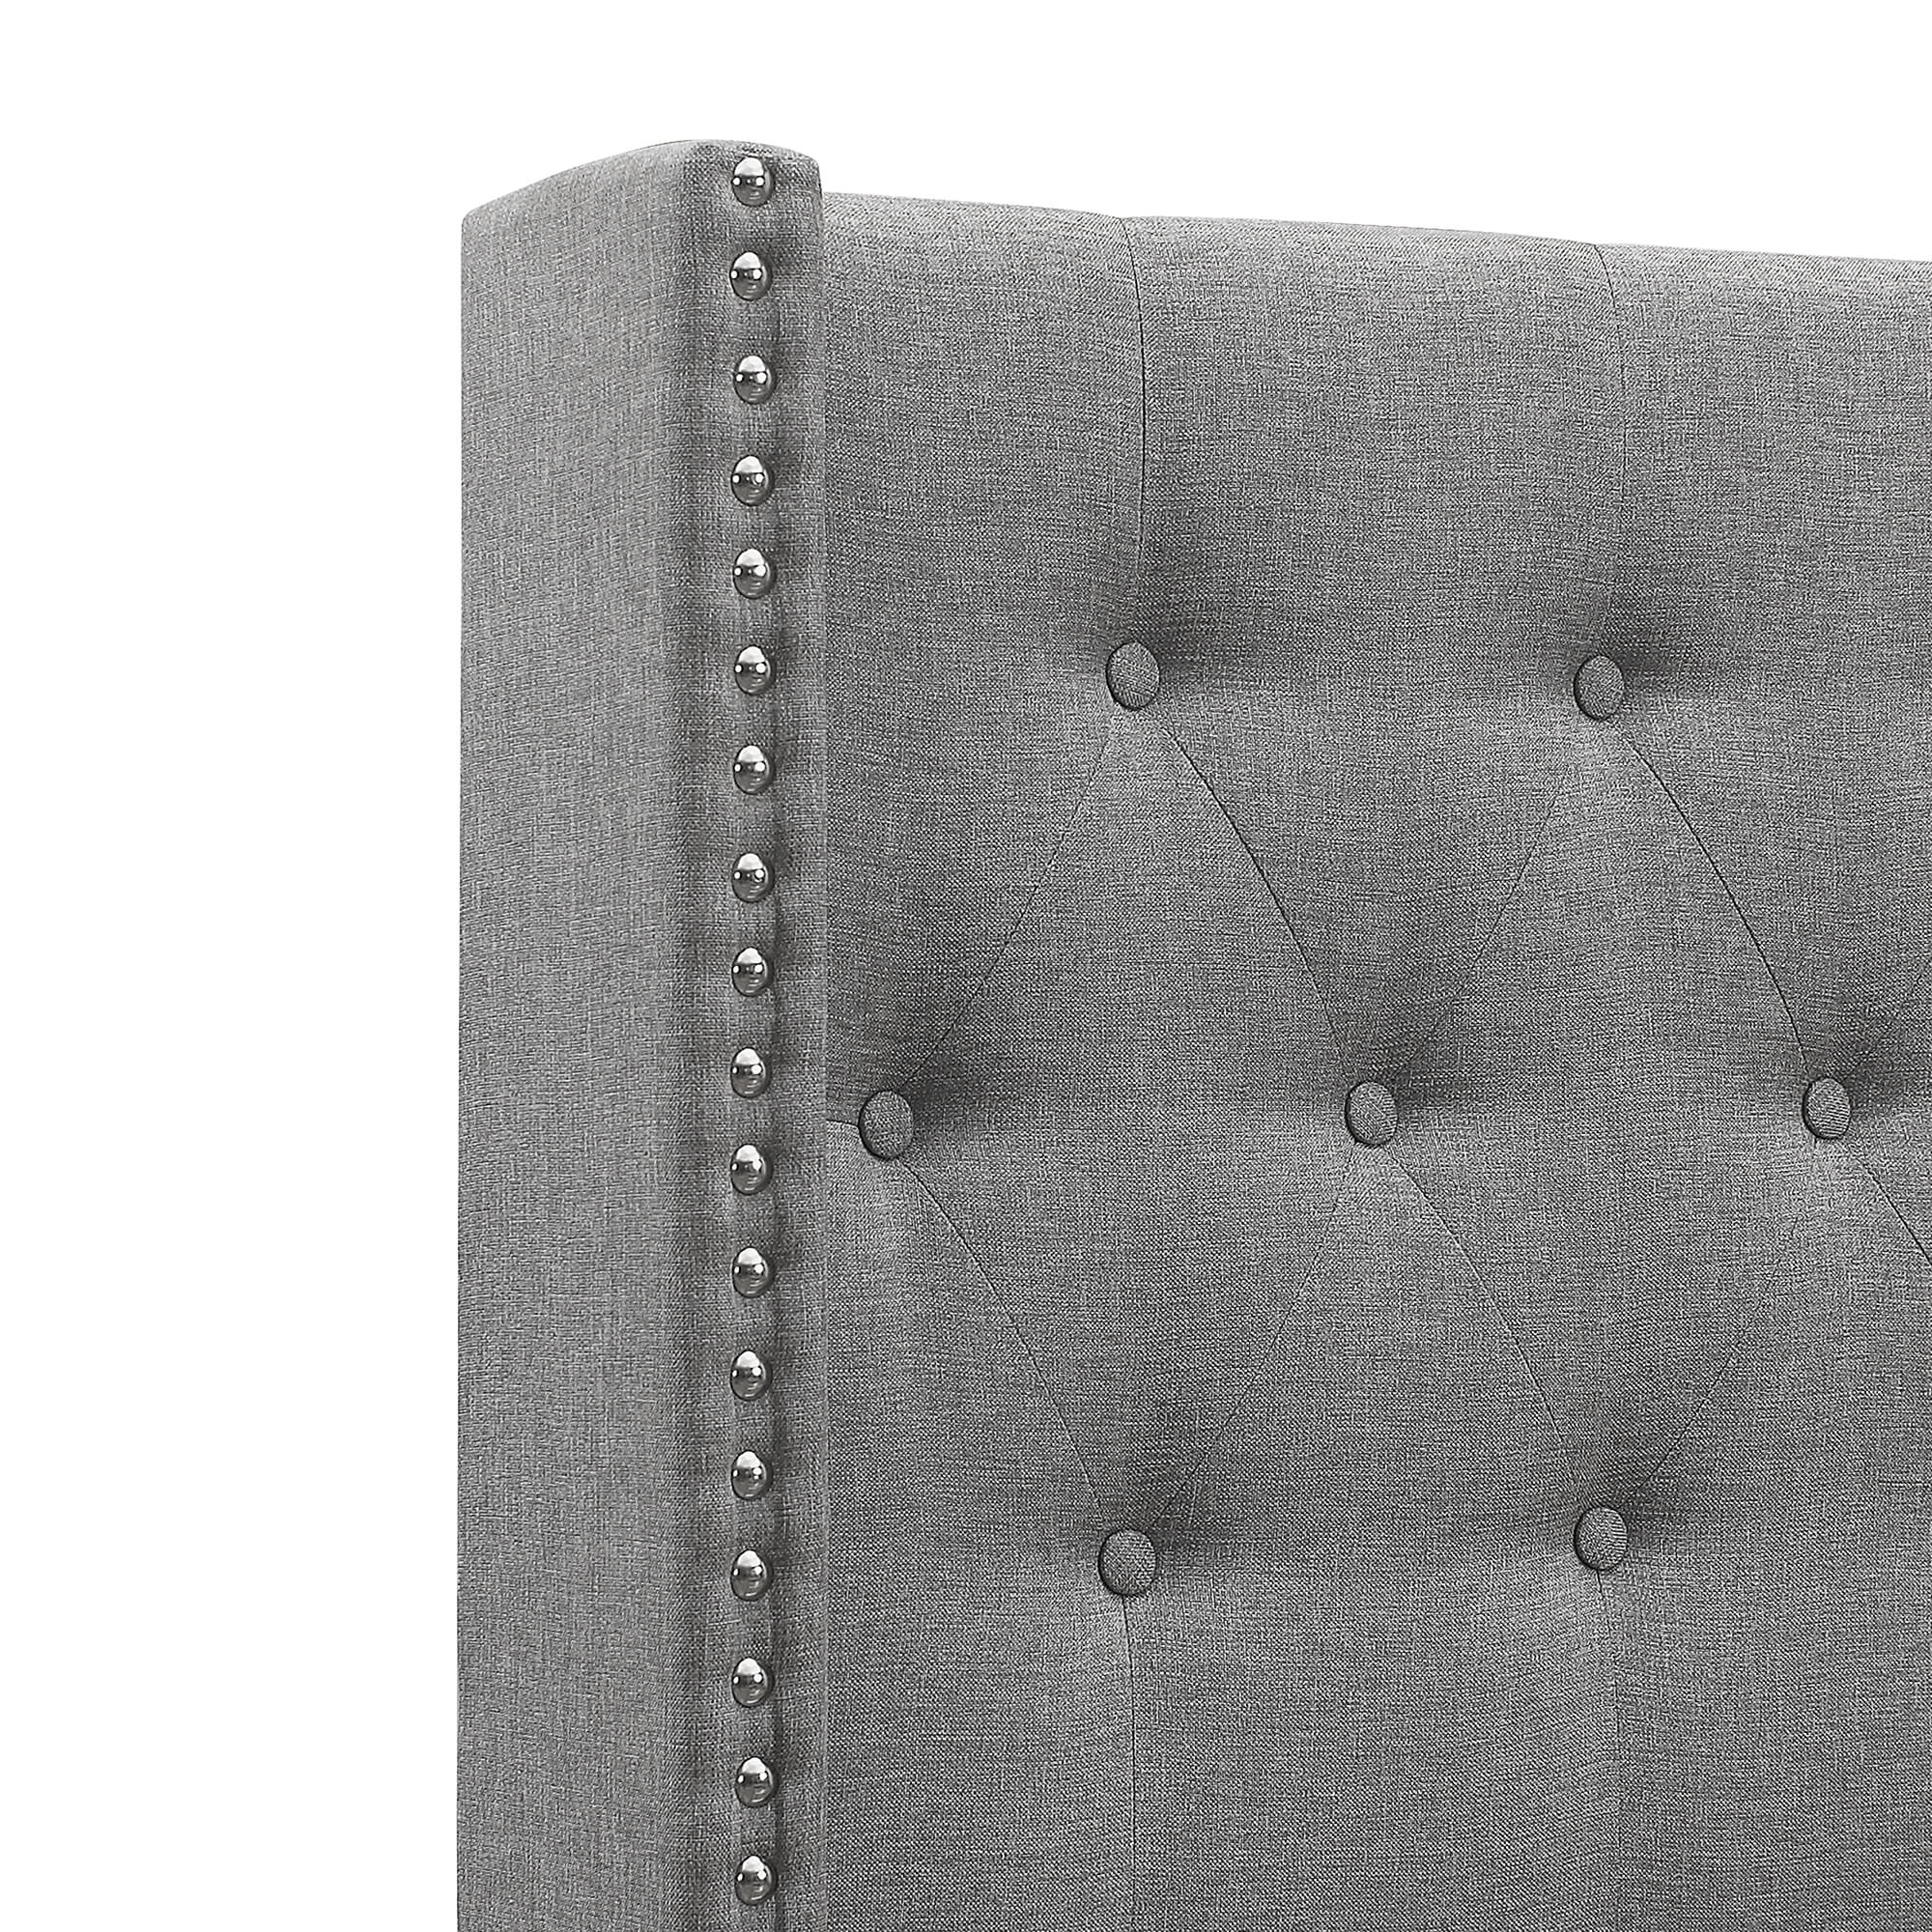 Oliver Upholstered Bed in Light Grey with classic tufted buttons and diamond nail design